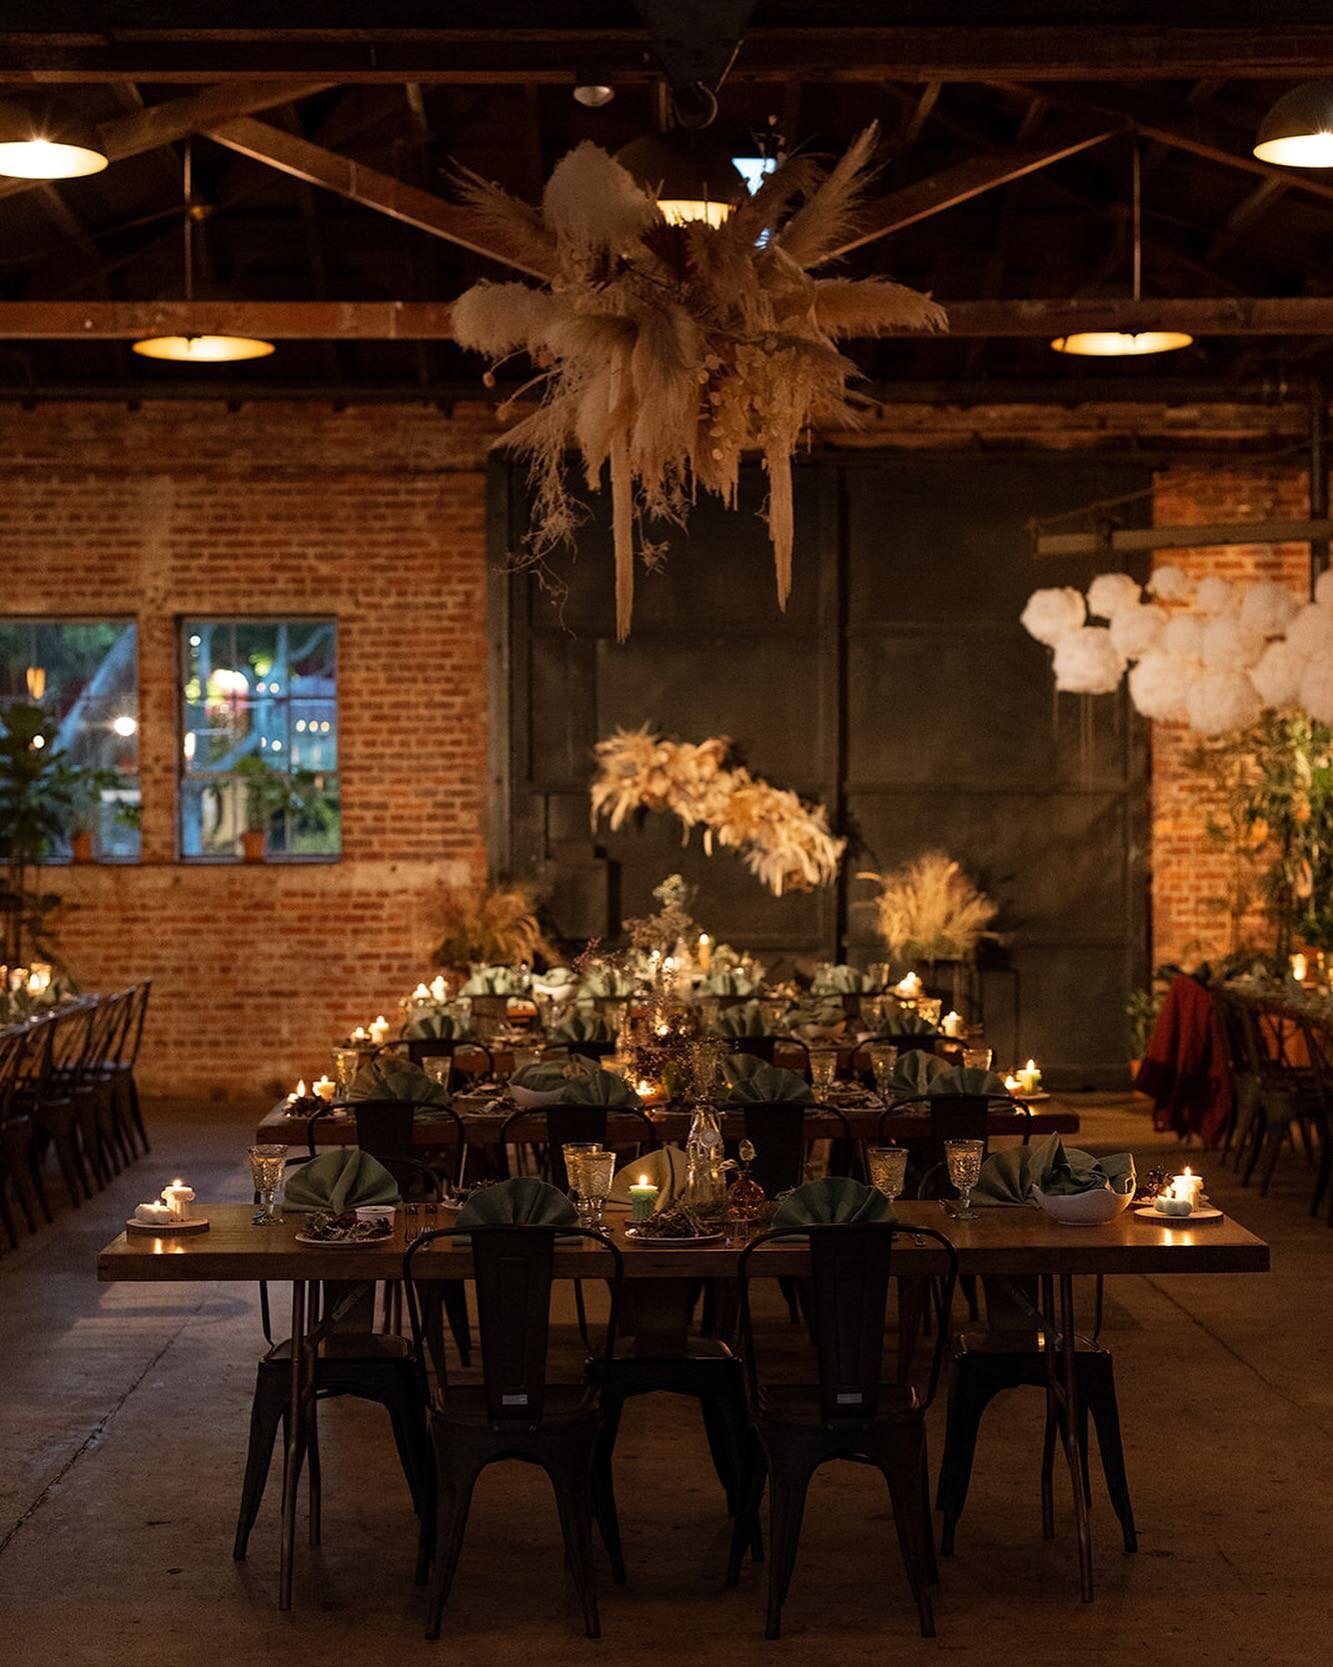 We will never get tired of a dinner lit by candle light!

Captured by @christackphoto 
Catering @tastecrafteatery 
Bar @sidecarcocktailco 
Florals @idlewildfloral @thepennyslo